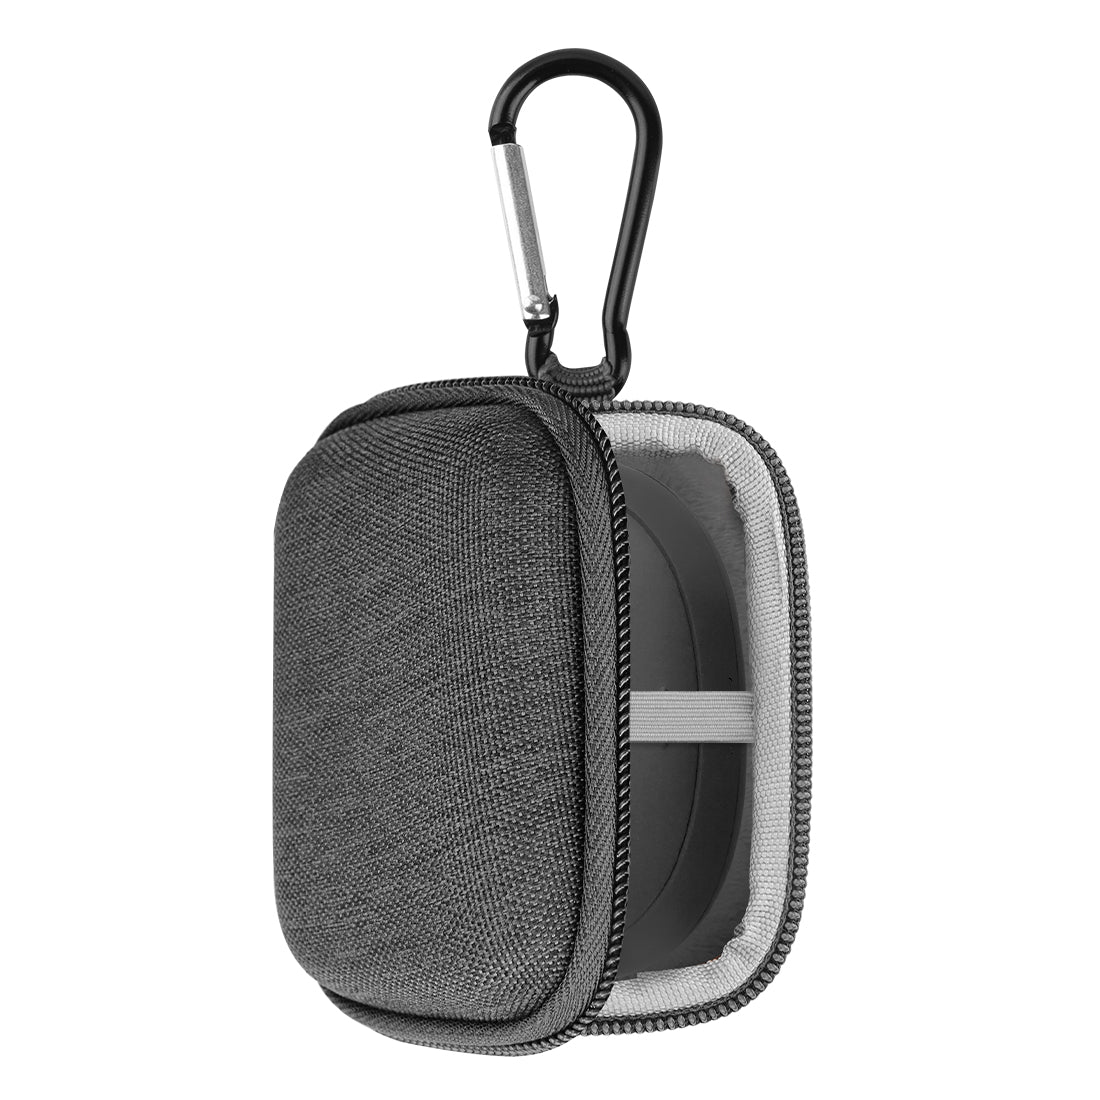 Geekria Pro Earbuds Case Compatible with Anker Soundcore Liberty 2 Pro